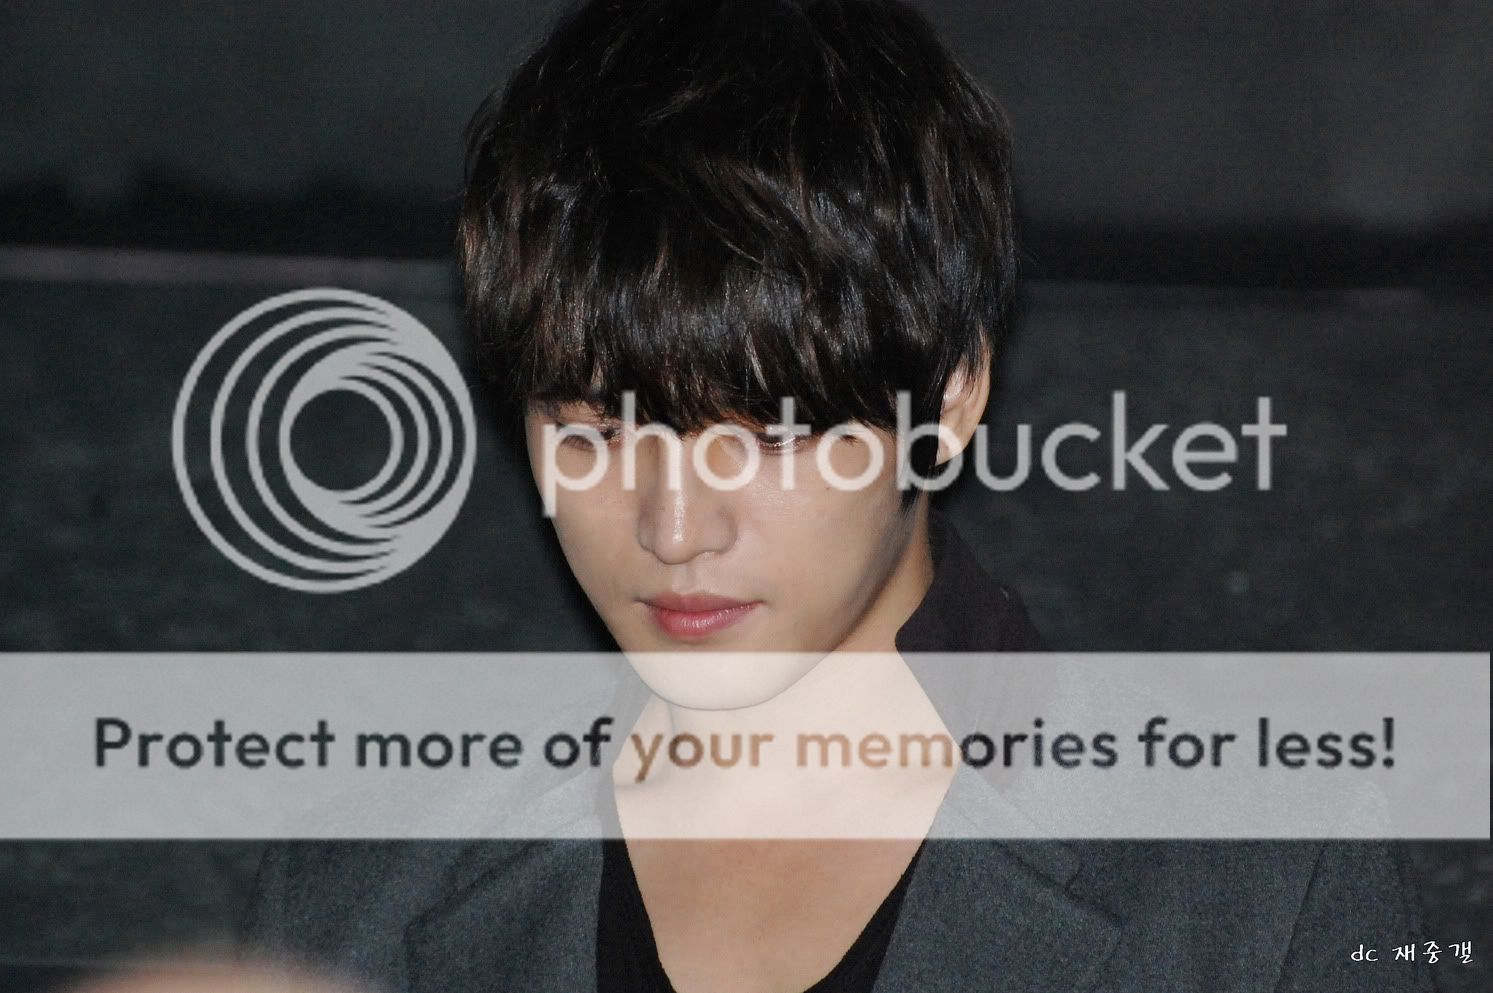 [25.11.12][Pics] Jaejoong - “Code Name Jackal” Stage Greeting (Day 6)   S40